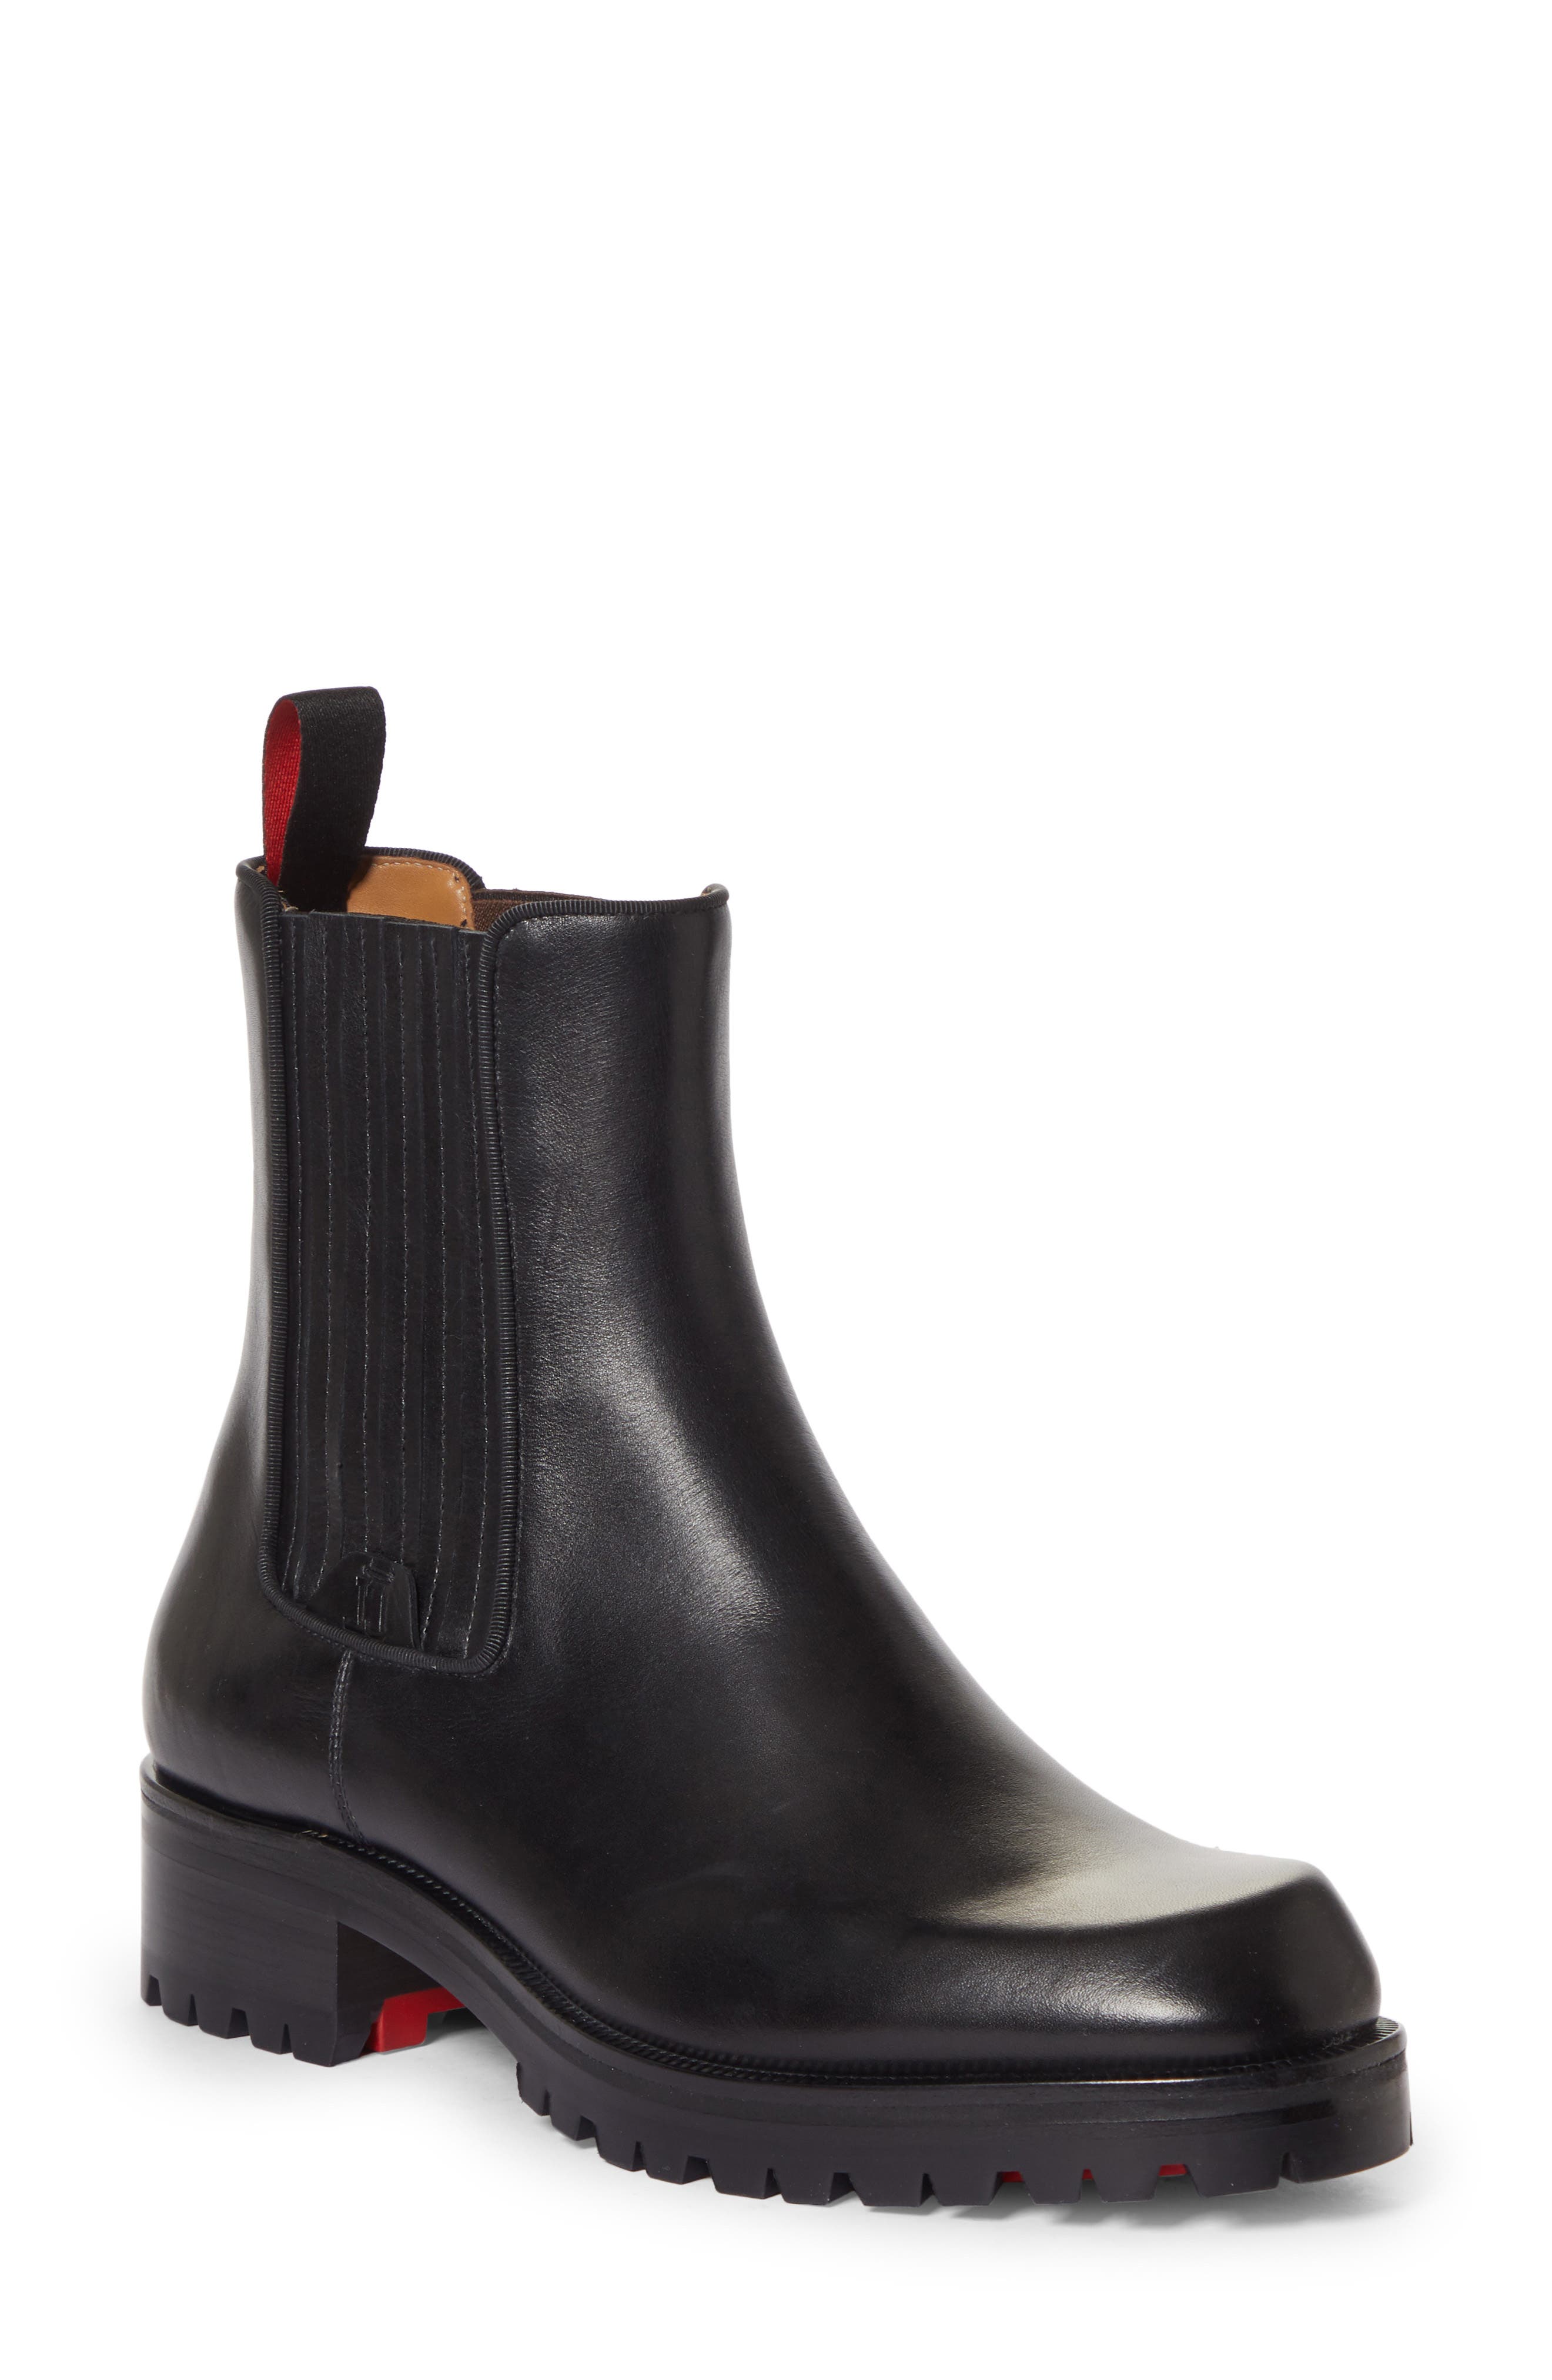 louboutin mens boots